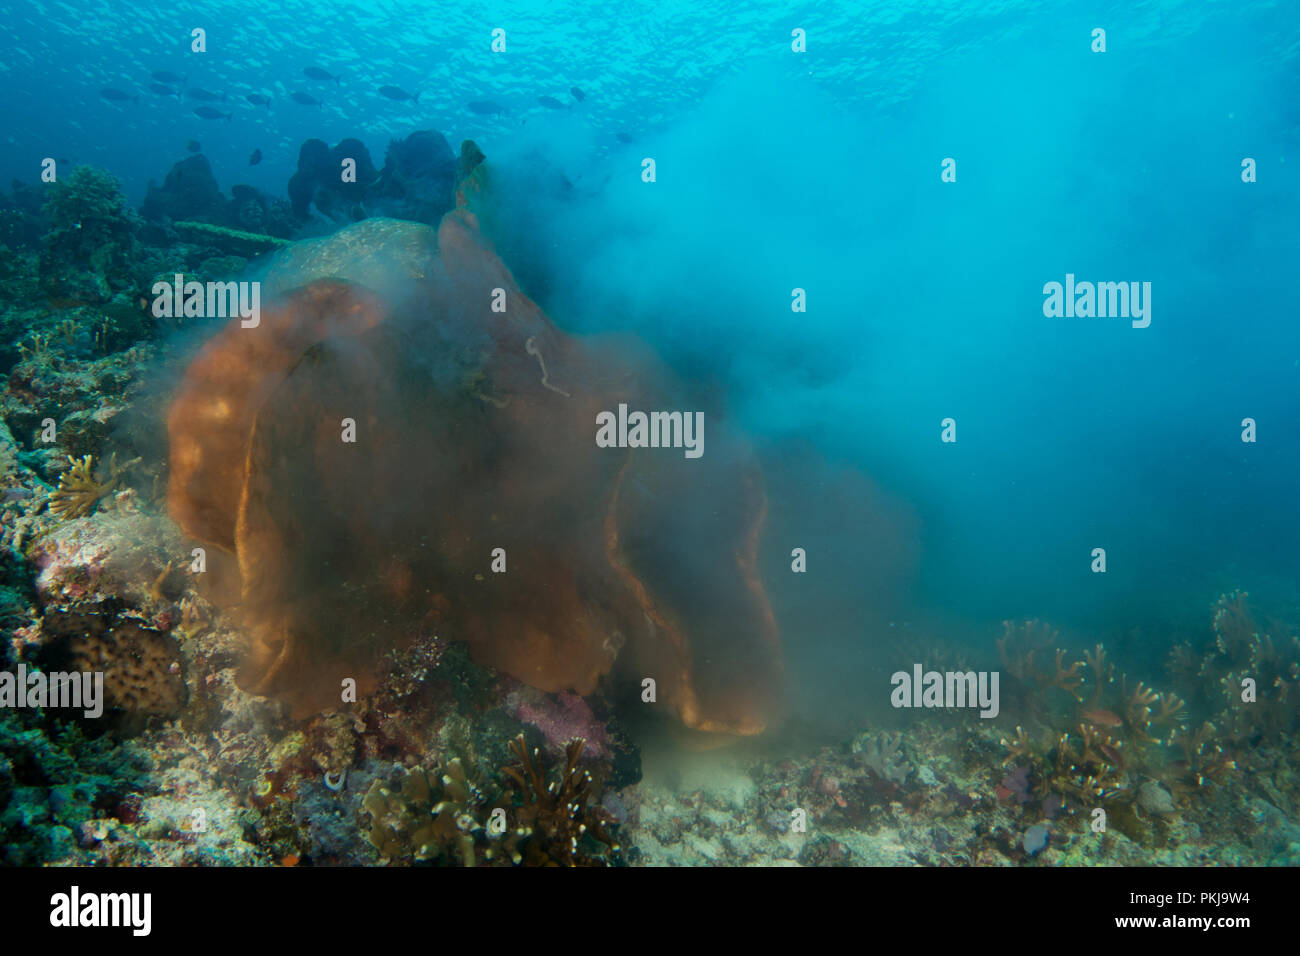 Giant sponges (species unknown) broadcast spawning on shallow tropical reef. Taken in Komodo National Park, Indonesia. Stock Photo